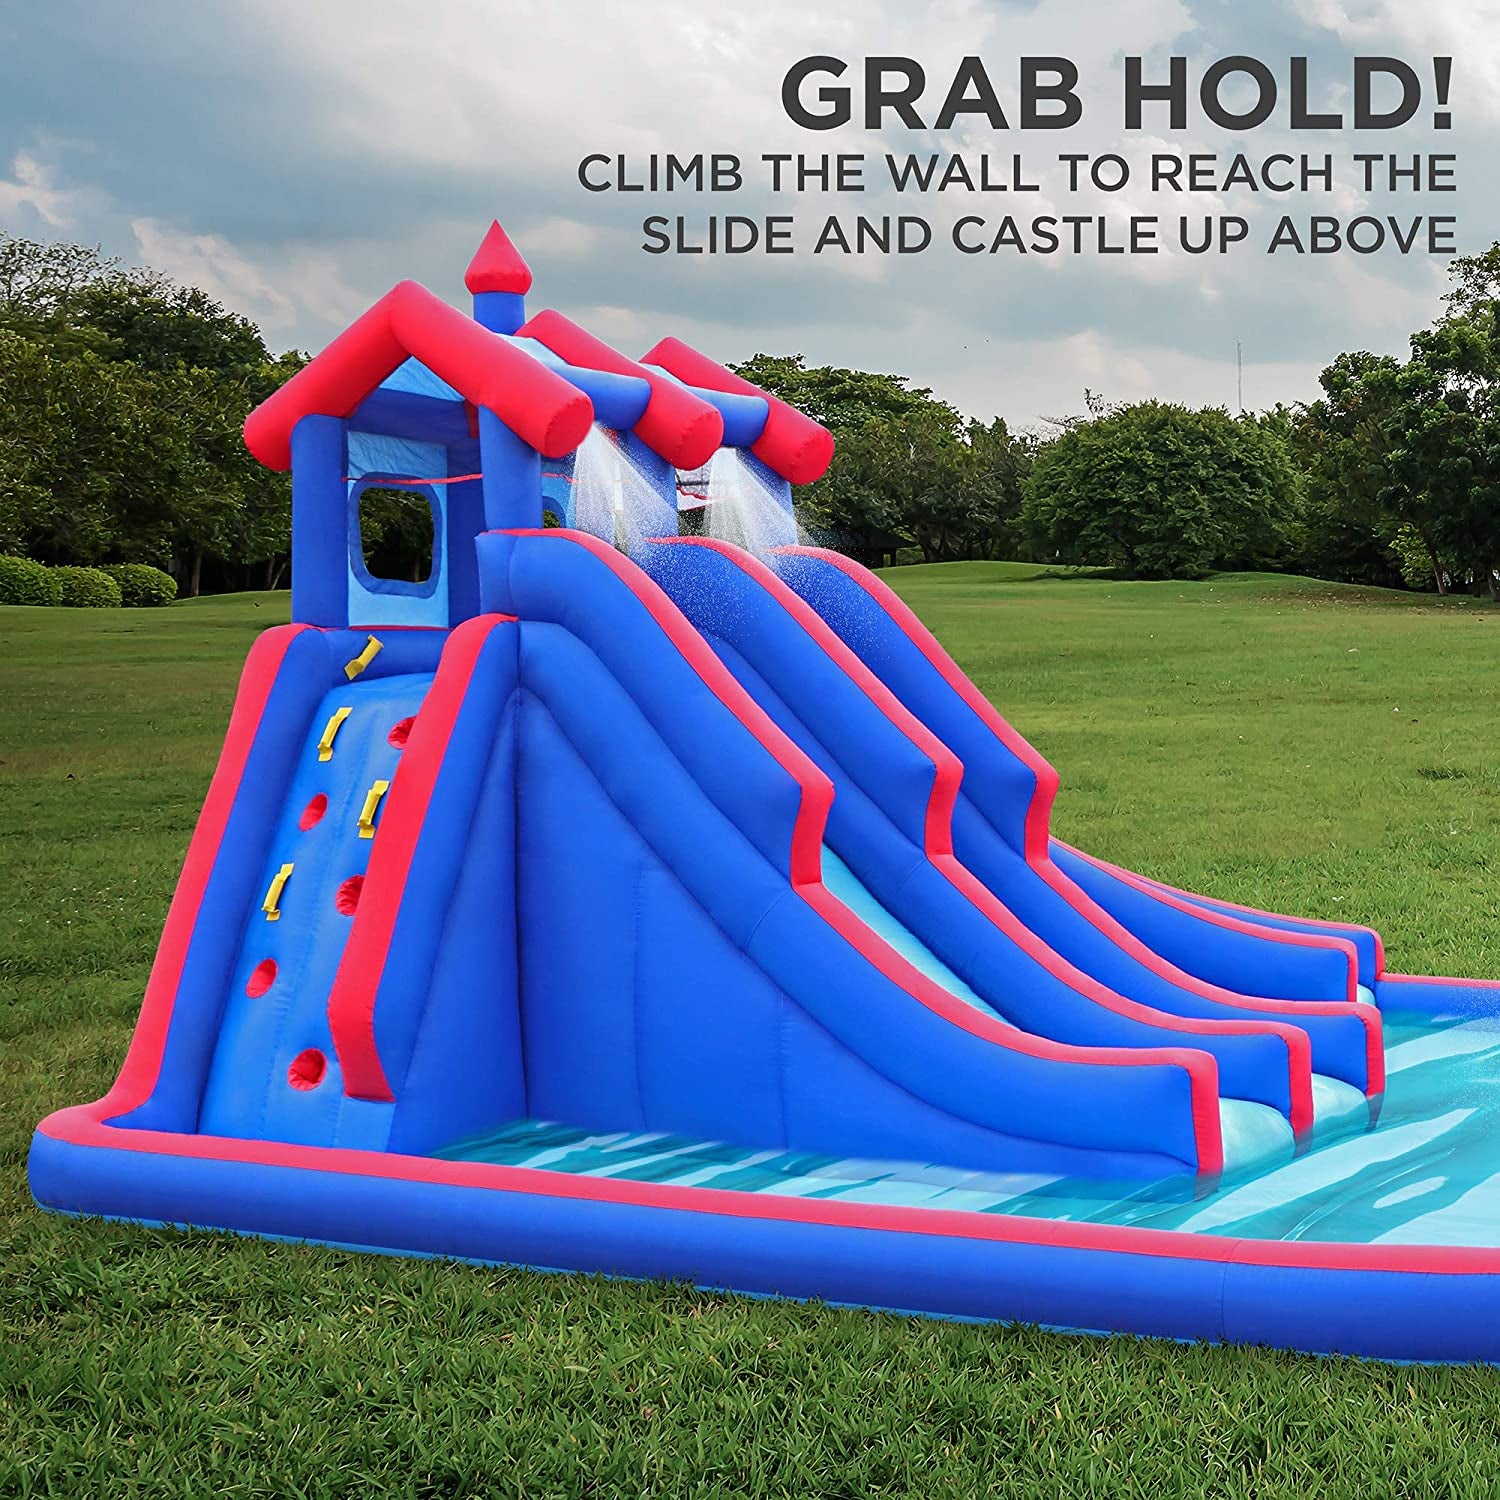 Mega Sport Inflatable Water Triple Slide Park – Heavy-Duty for Outdoor Fun - Climbing Wall, 3 Slides & Splash Pool – Easy to Set up & Inflate with Included Air Pump & Carrying Case